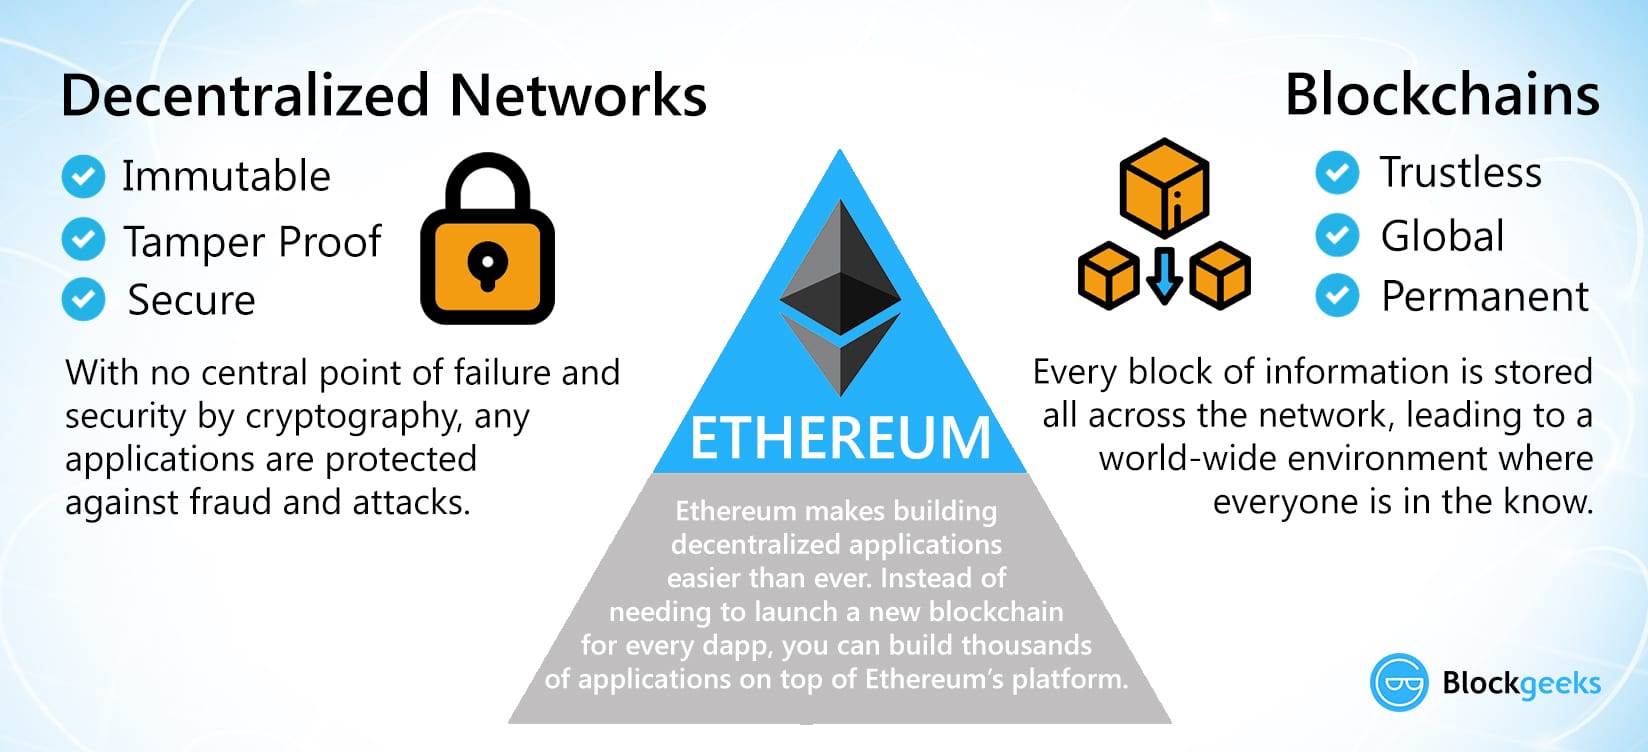 Ethereum - Definition, What is Ethereum, Advantages of Ethereum, and Latest News - ClearTax